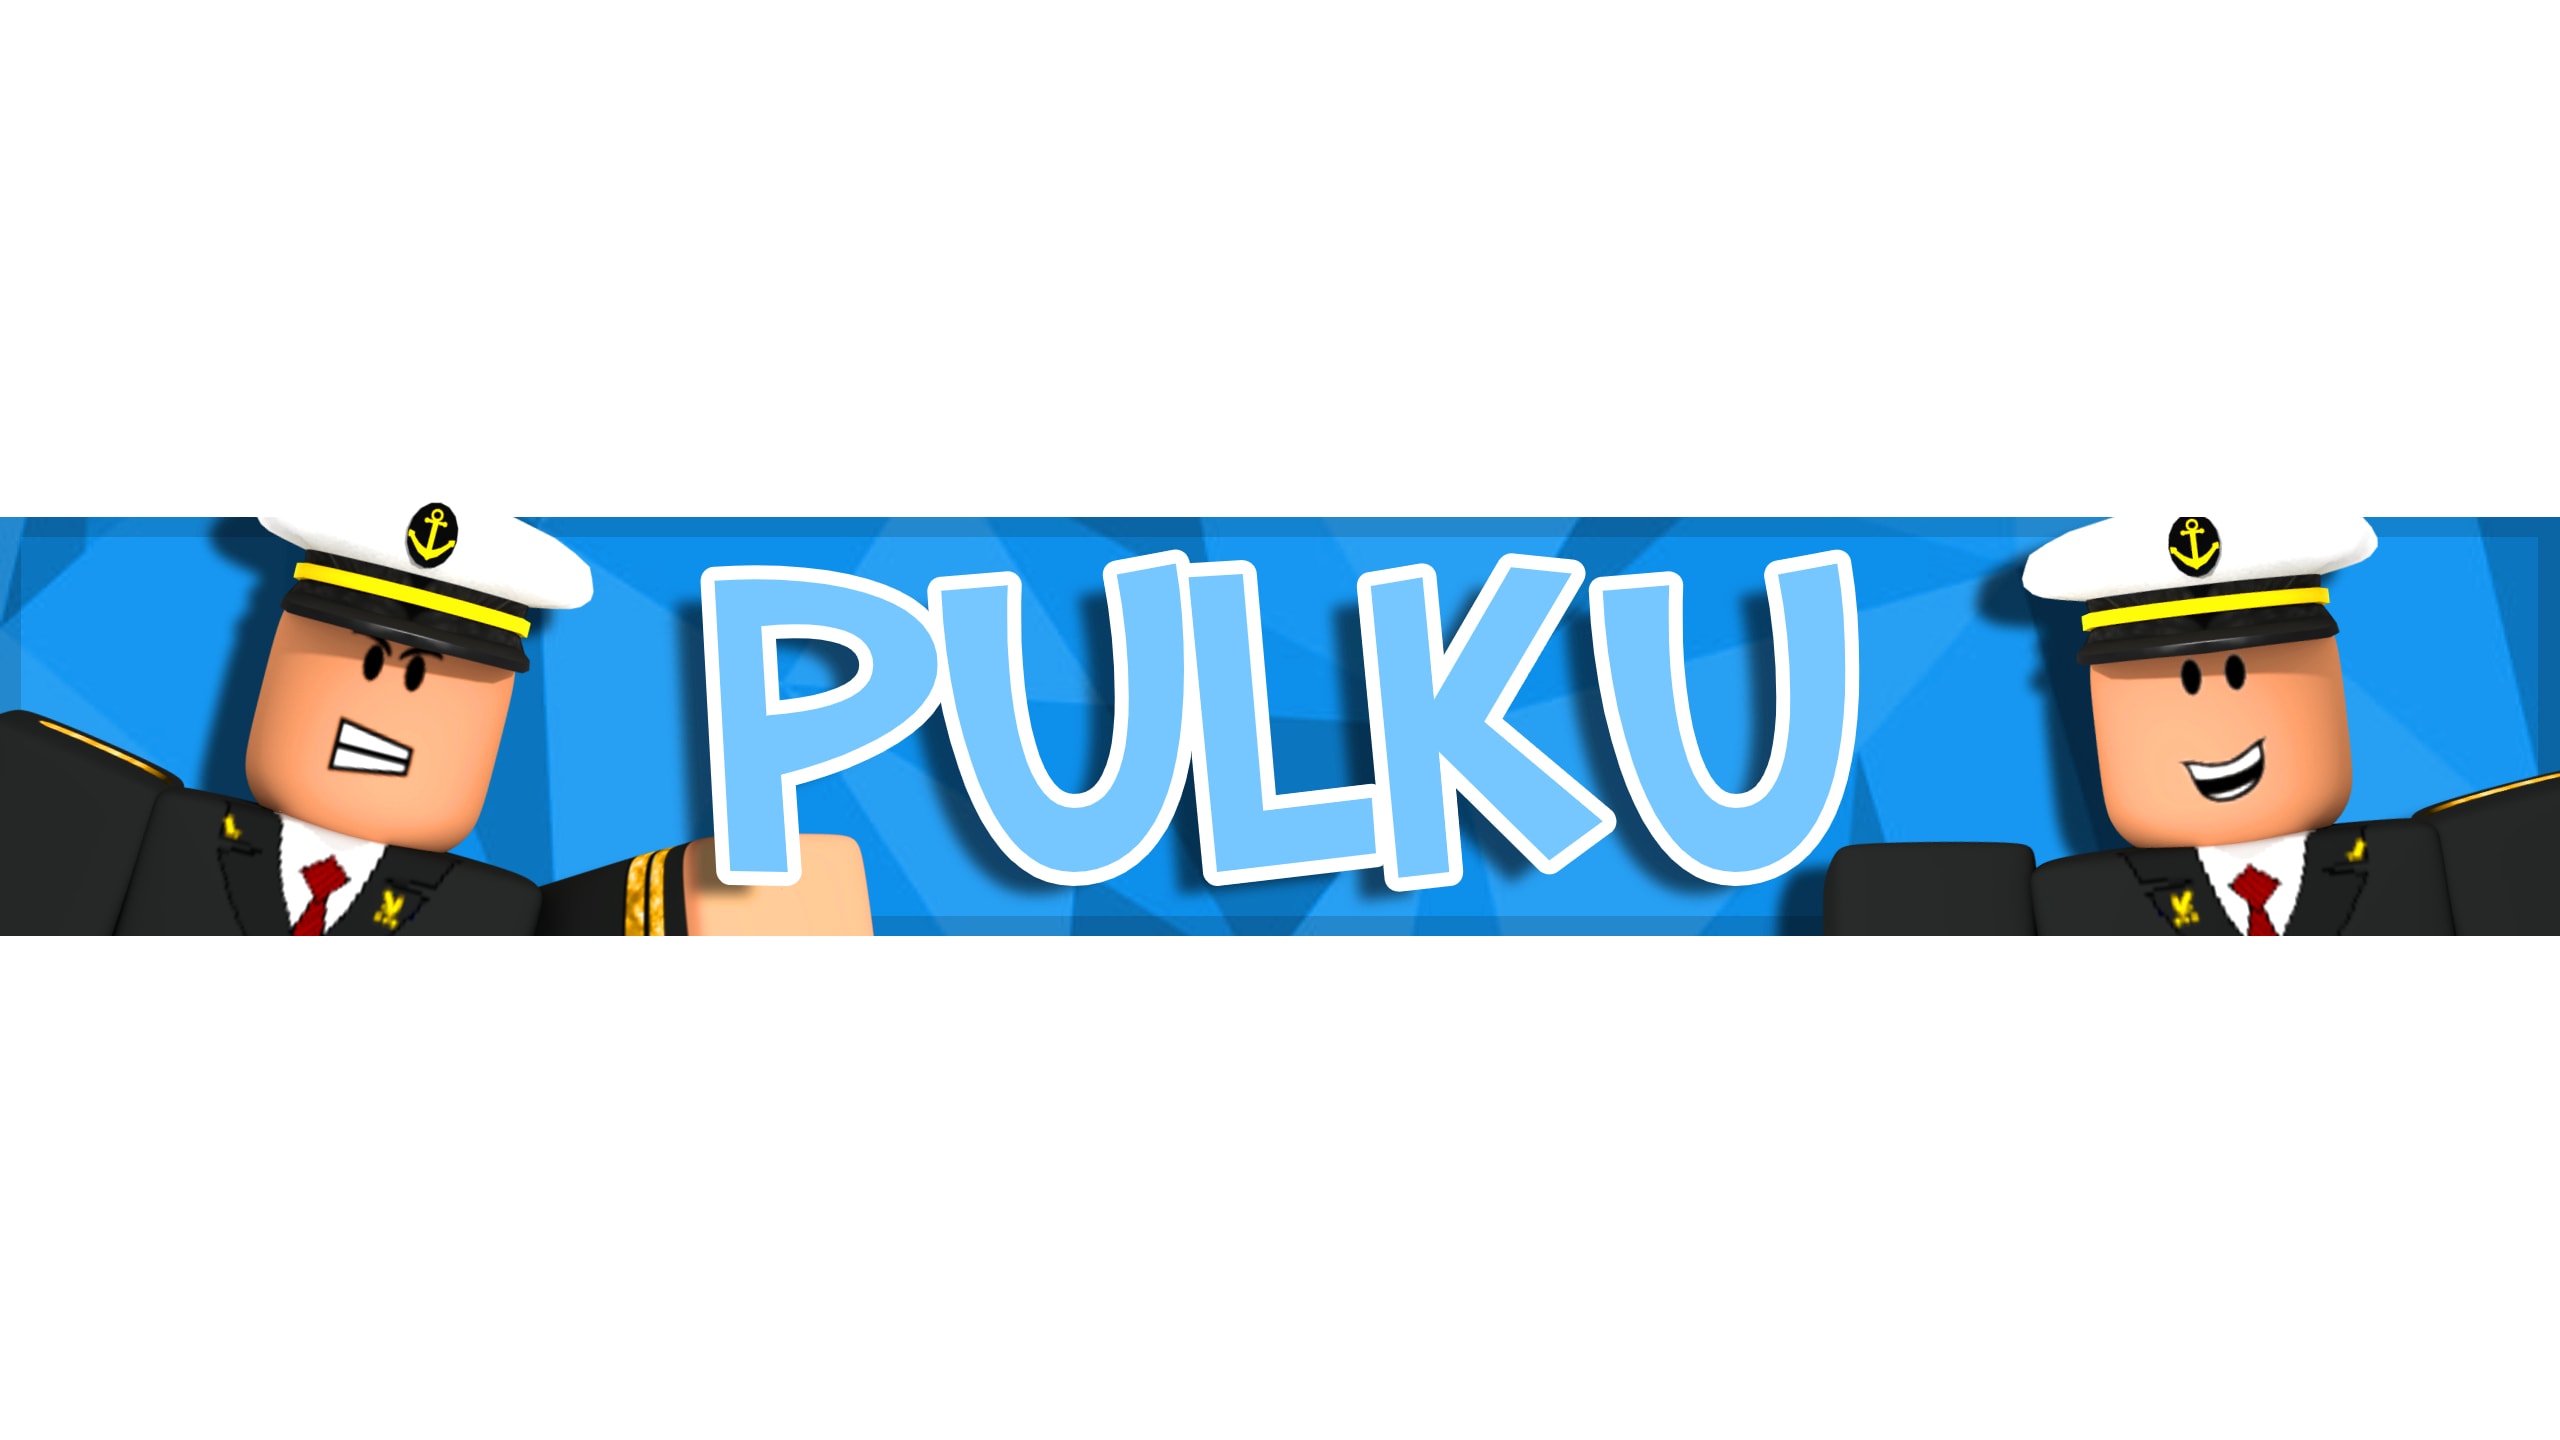 Make You A Custom Gfx Roblox Youtube Banner Or Channel Art By Pulku1 Fiverr - channel art roblox banner